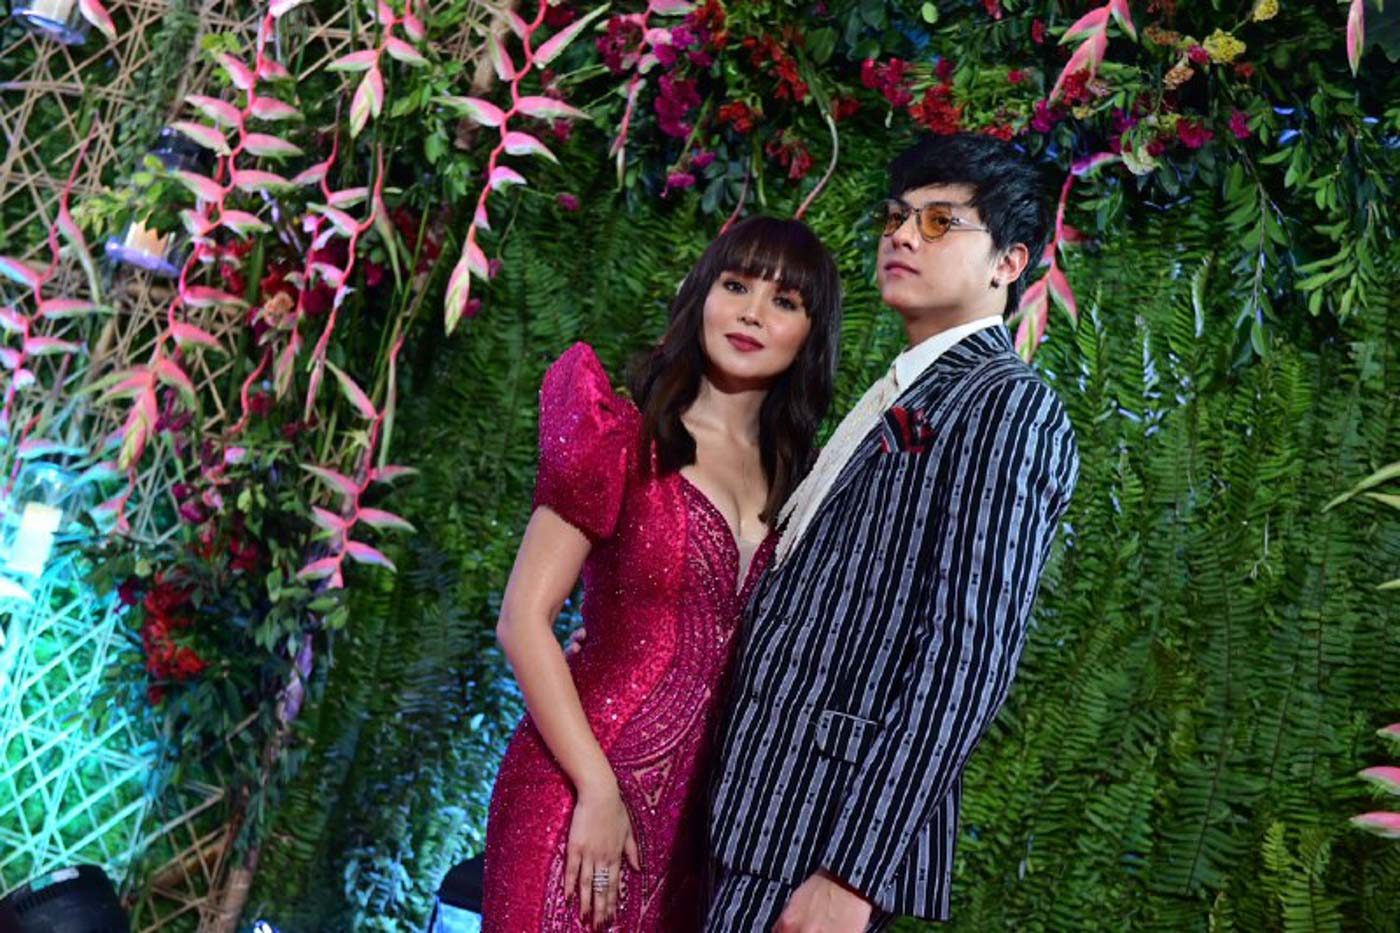 ‘New era’: ABS-CBN teases return of Star Magic Ball and All-Star Games